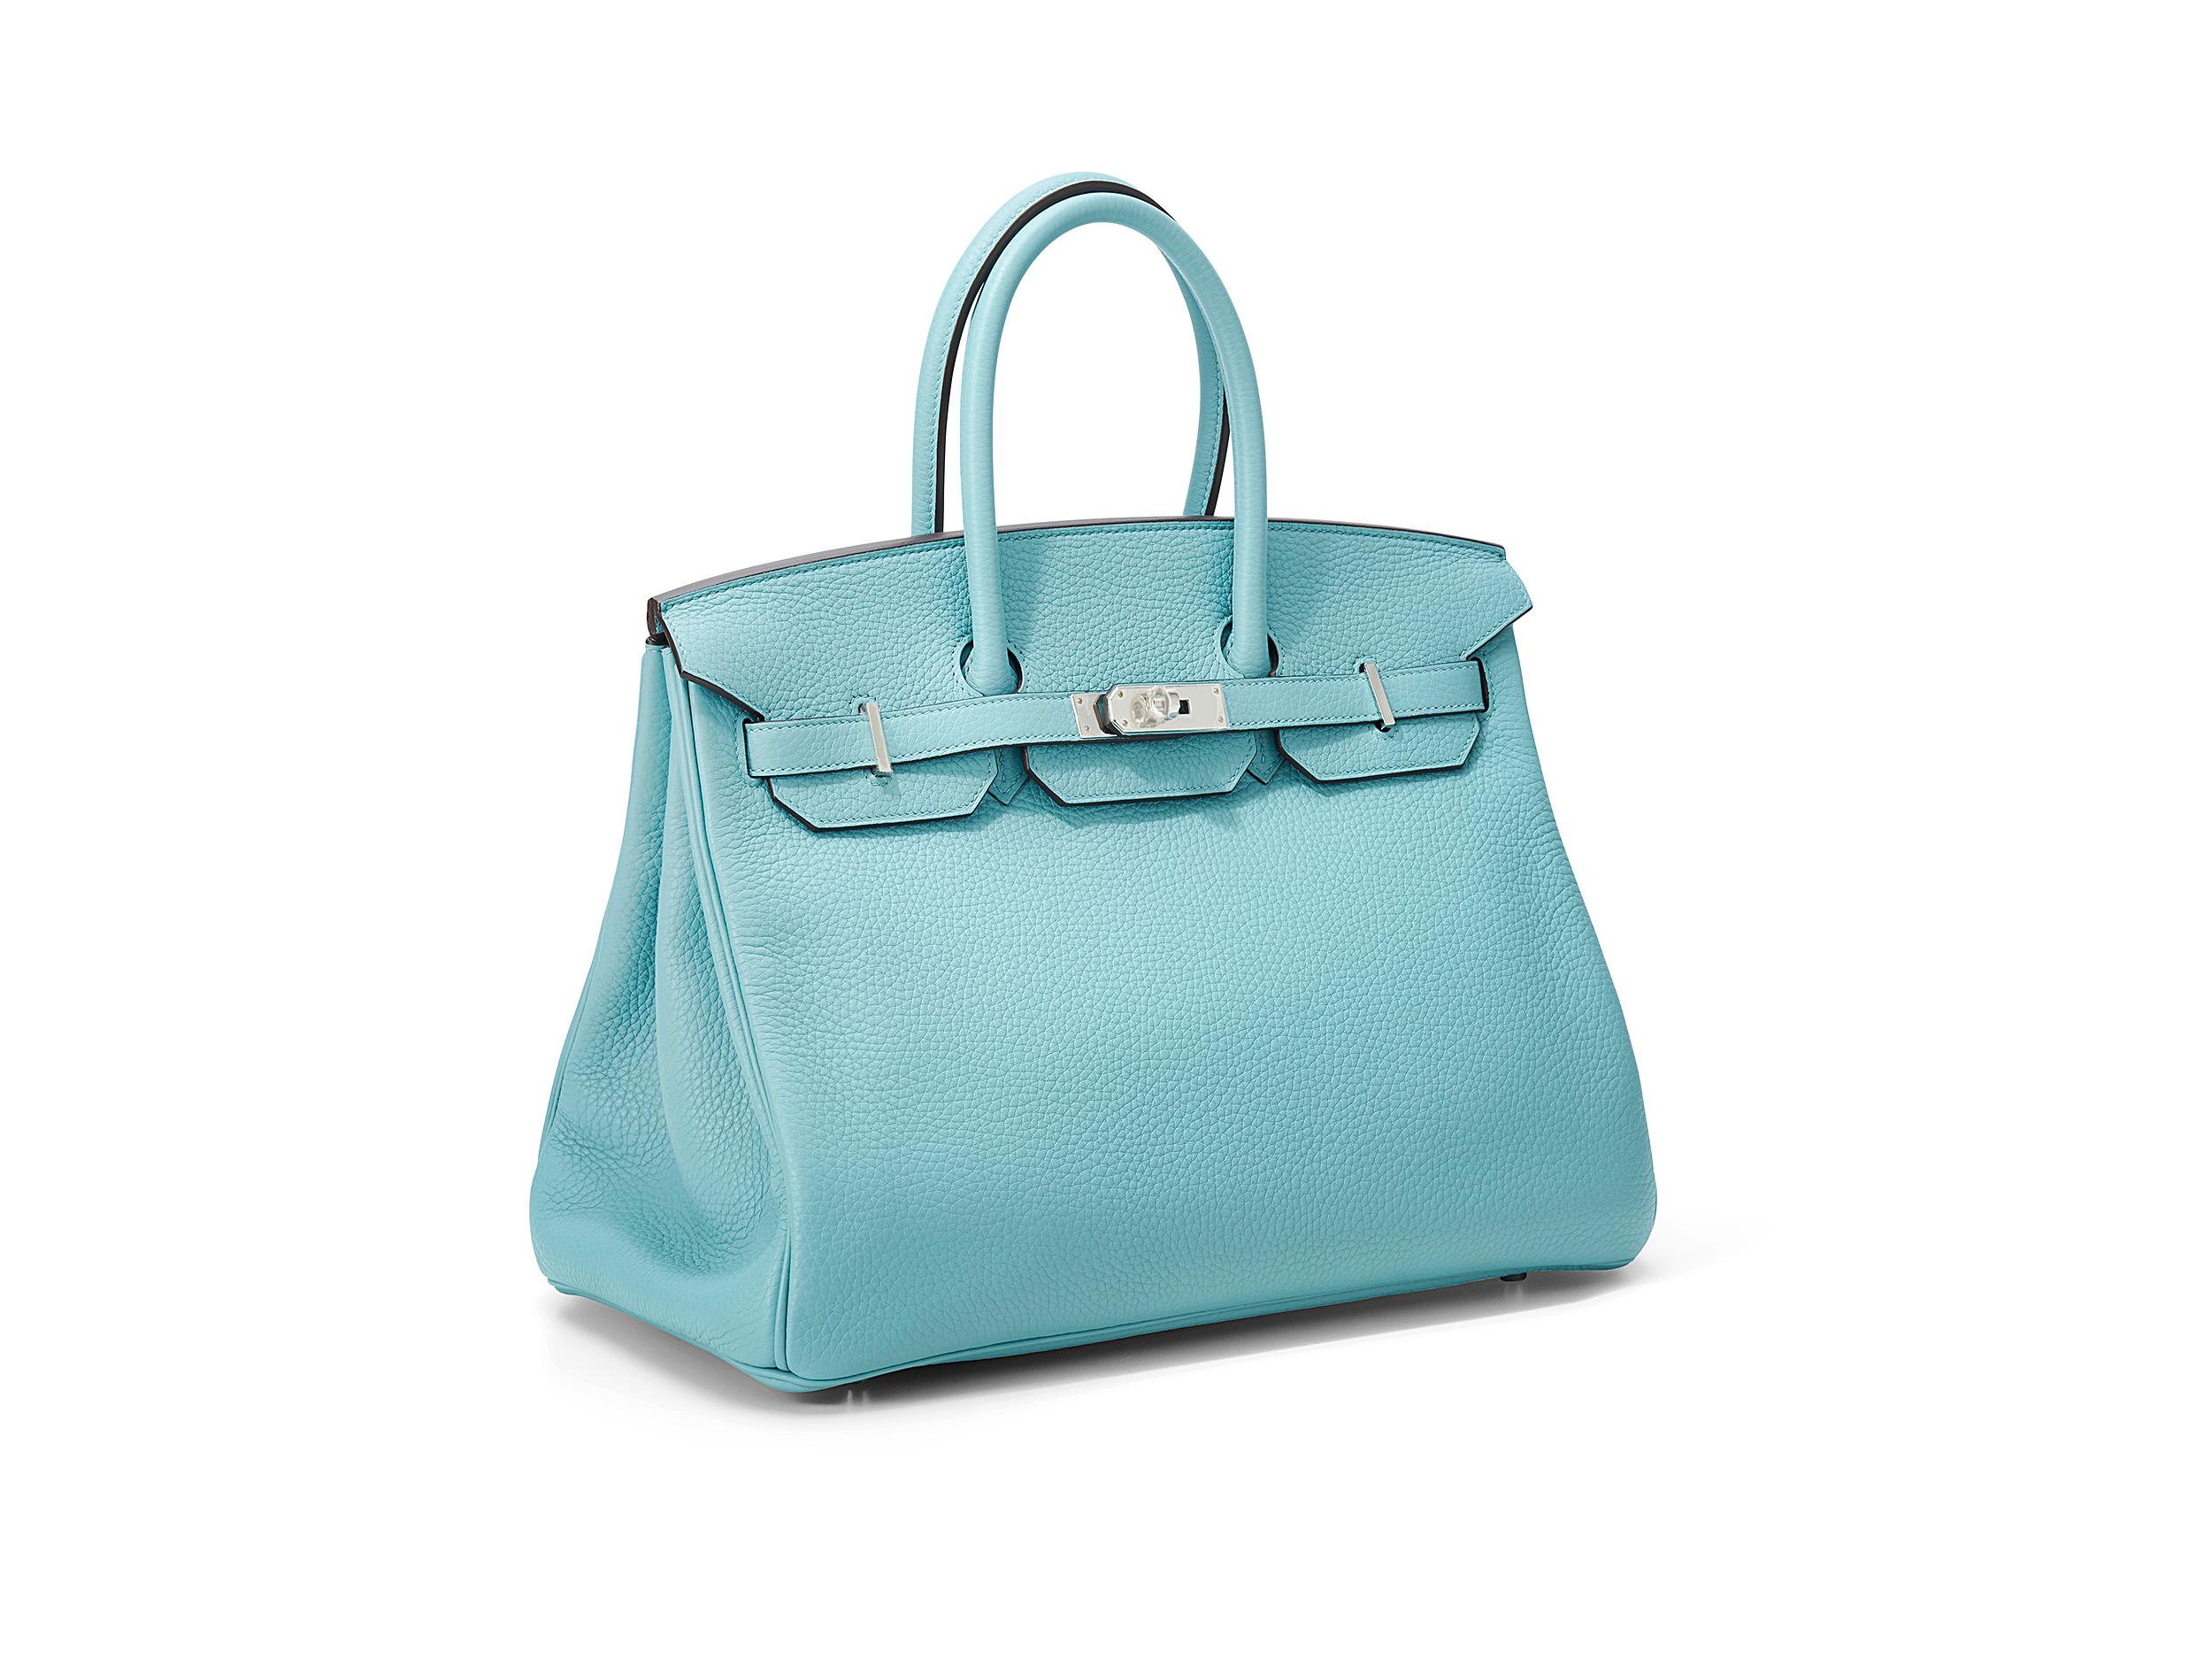 Hermès Birkin 35 in bleu atoll and taurillon clemence leather with palladium hardware. The bag is unworn and comes as full set. 
Stamp X (2016) 

